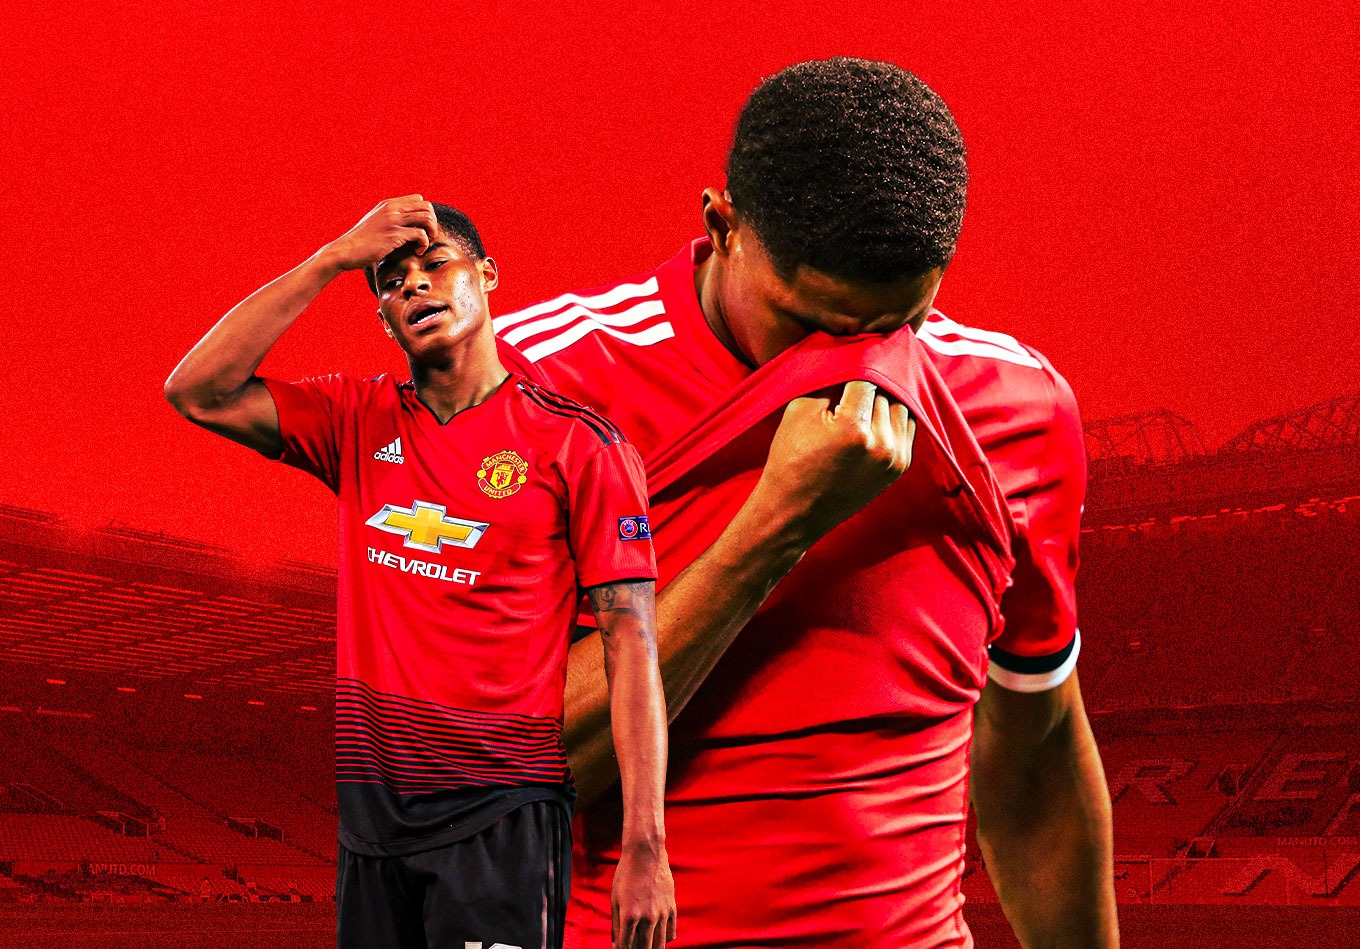 The Rashford Files: Manchester United’s Mr Endeavour Is Trying Hard, but It’s Not Working Right Now